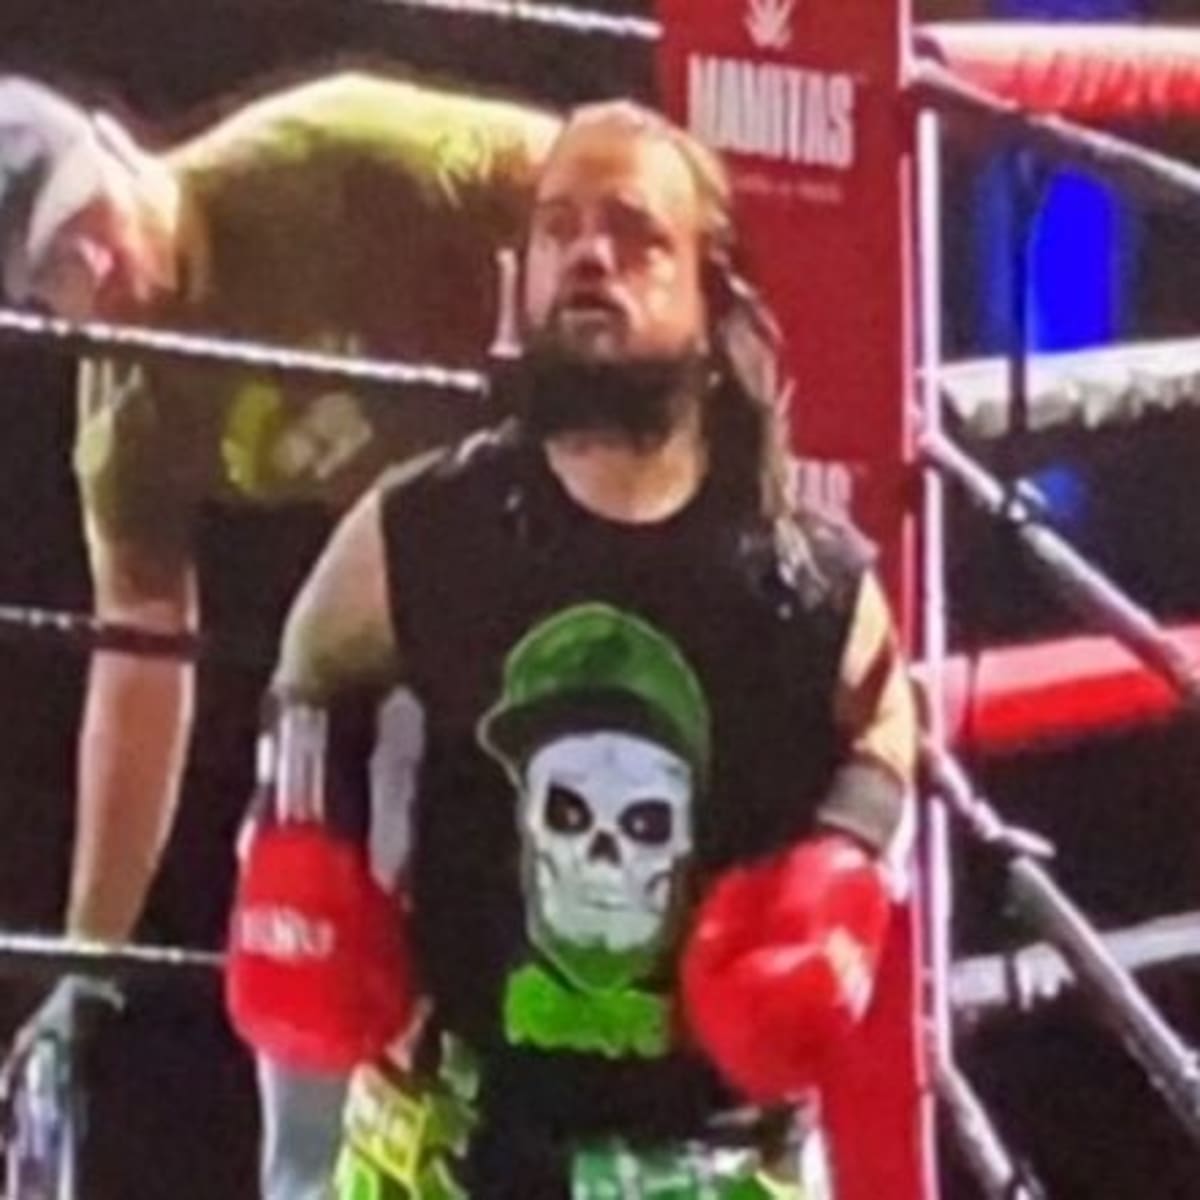 Swoggle loses his boxing debut at Rough N Rowdy event